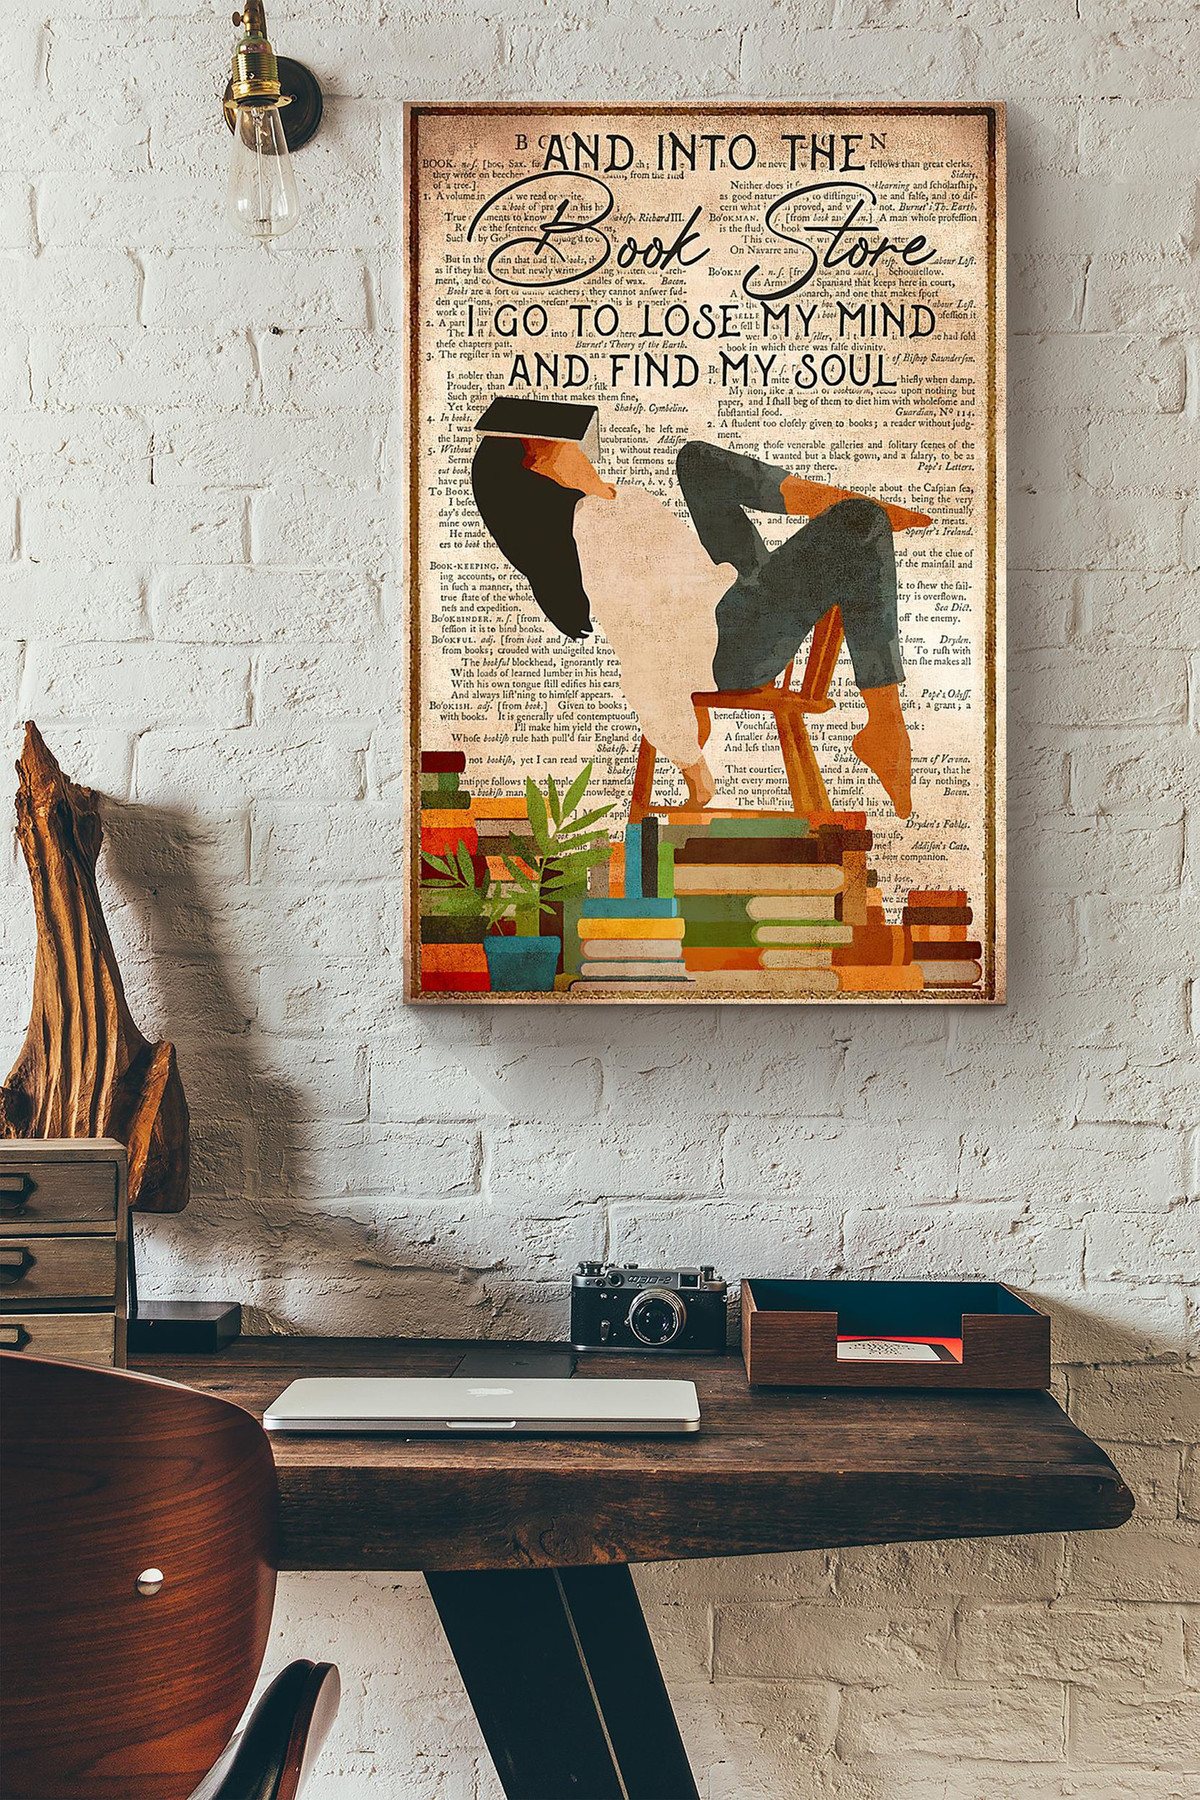 Sleeping Reading Into The Book Store I Lose My Mind Dictionary Canvas Painting Ideas, Canvas Hanging Prints, Gift Idea Framed Prints, Canvas Paintings Wrapped Canvas 8x10